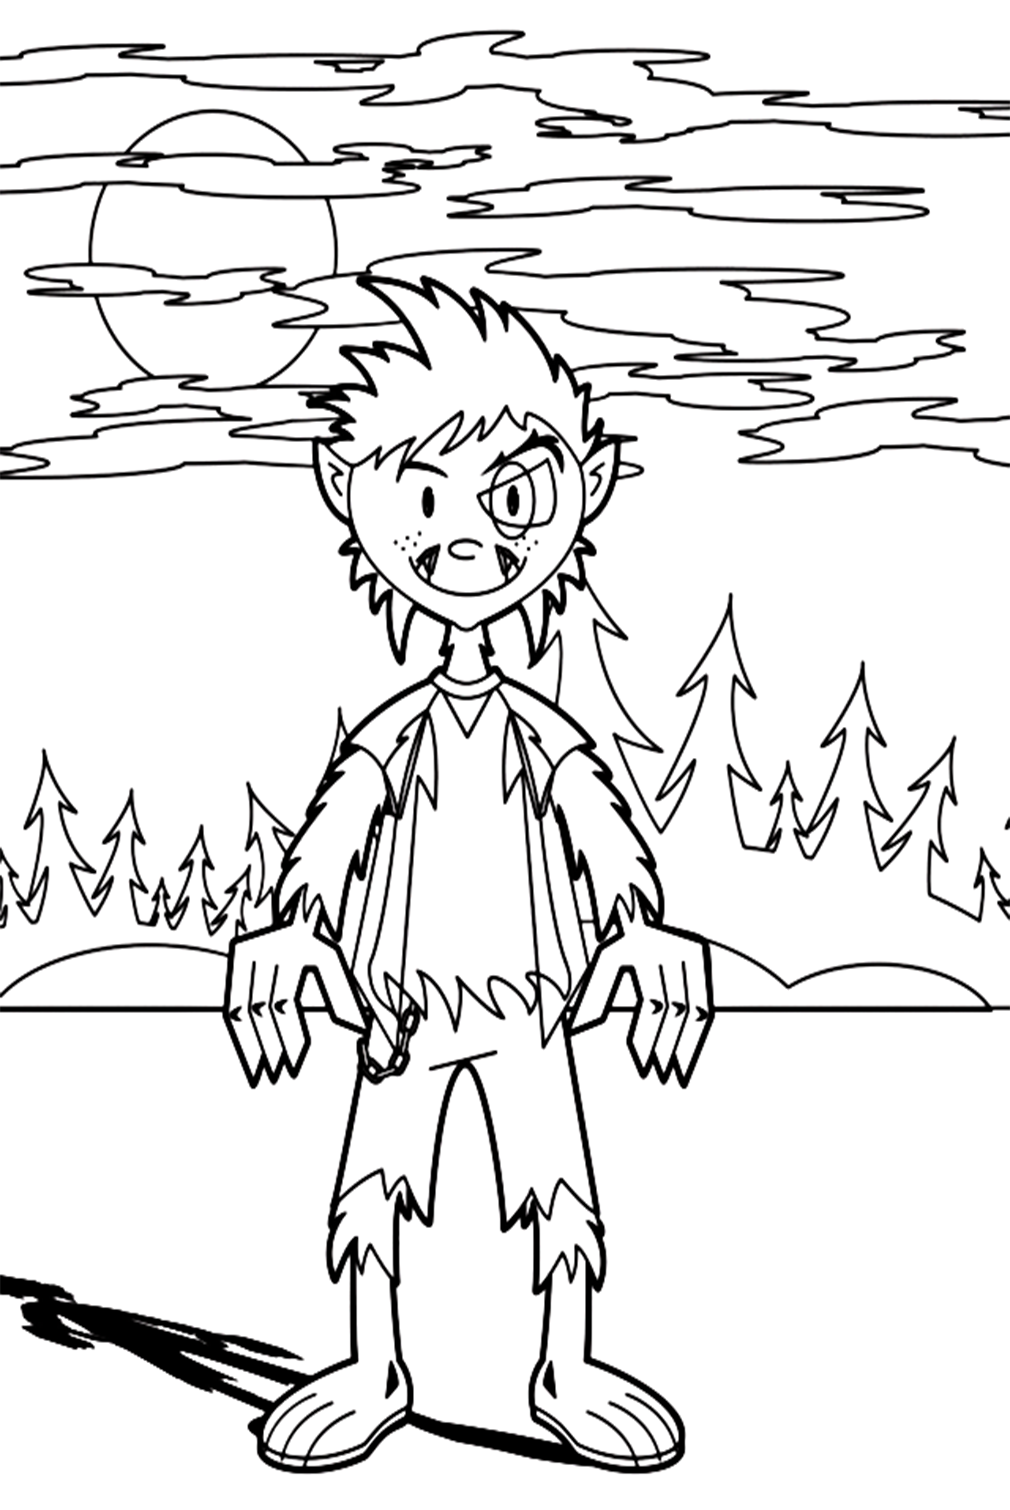 Changing Werewolf Coloring Pages